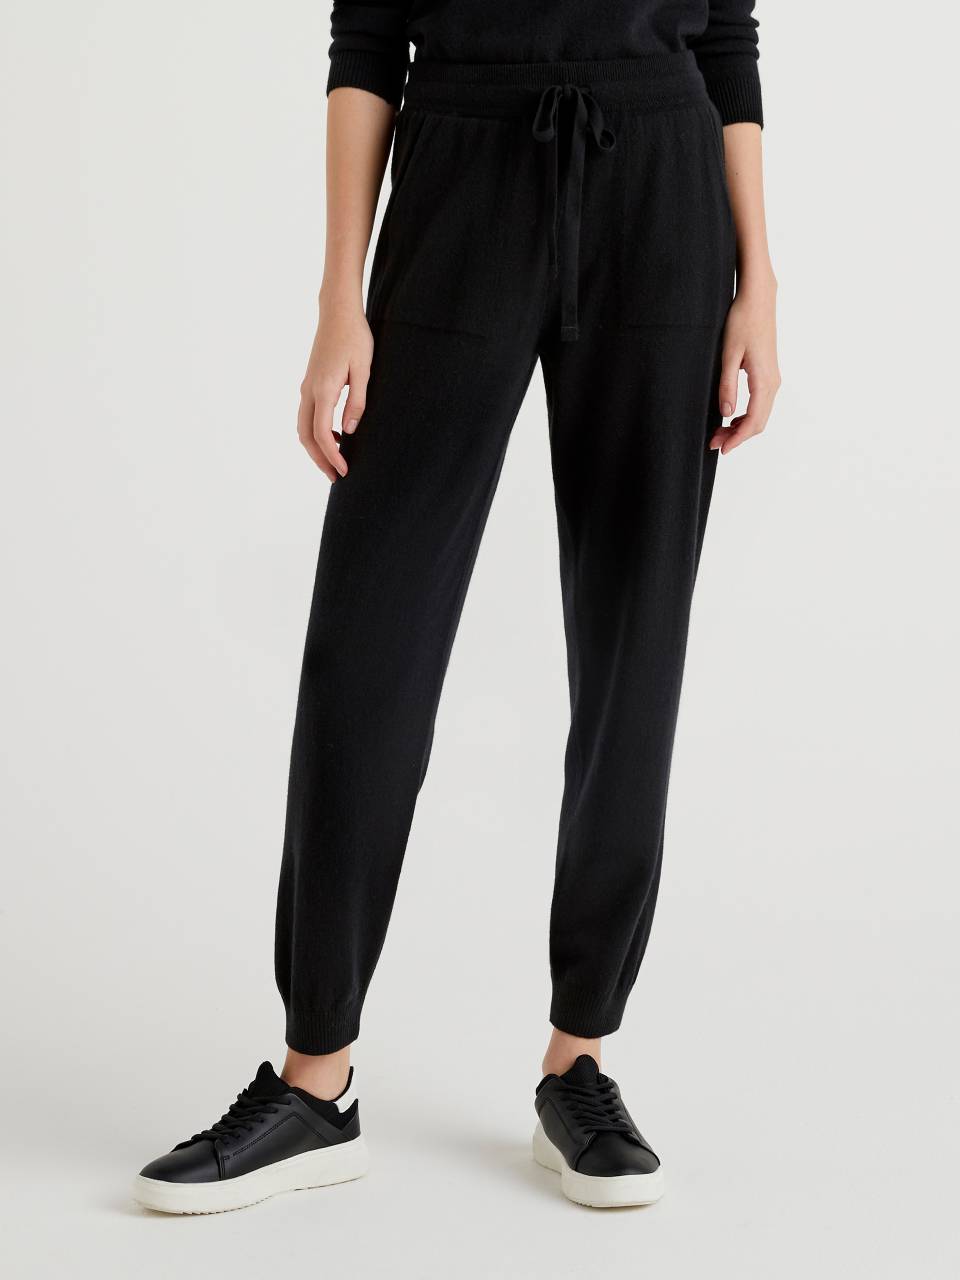 Benetton Pure cashmere sporty trousers. 1